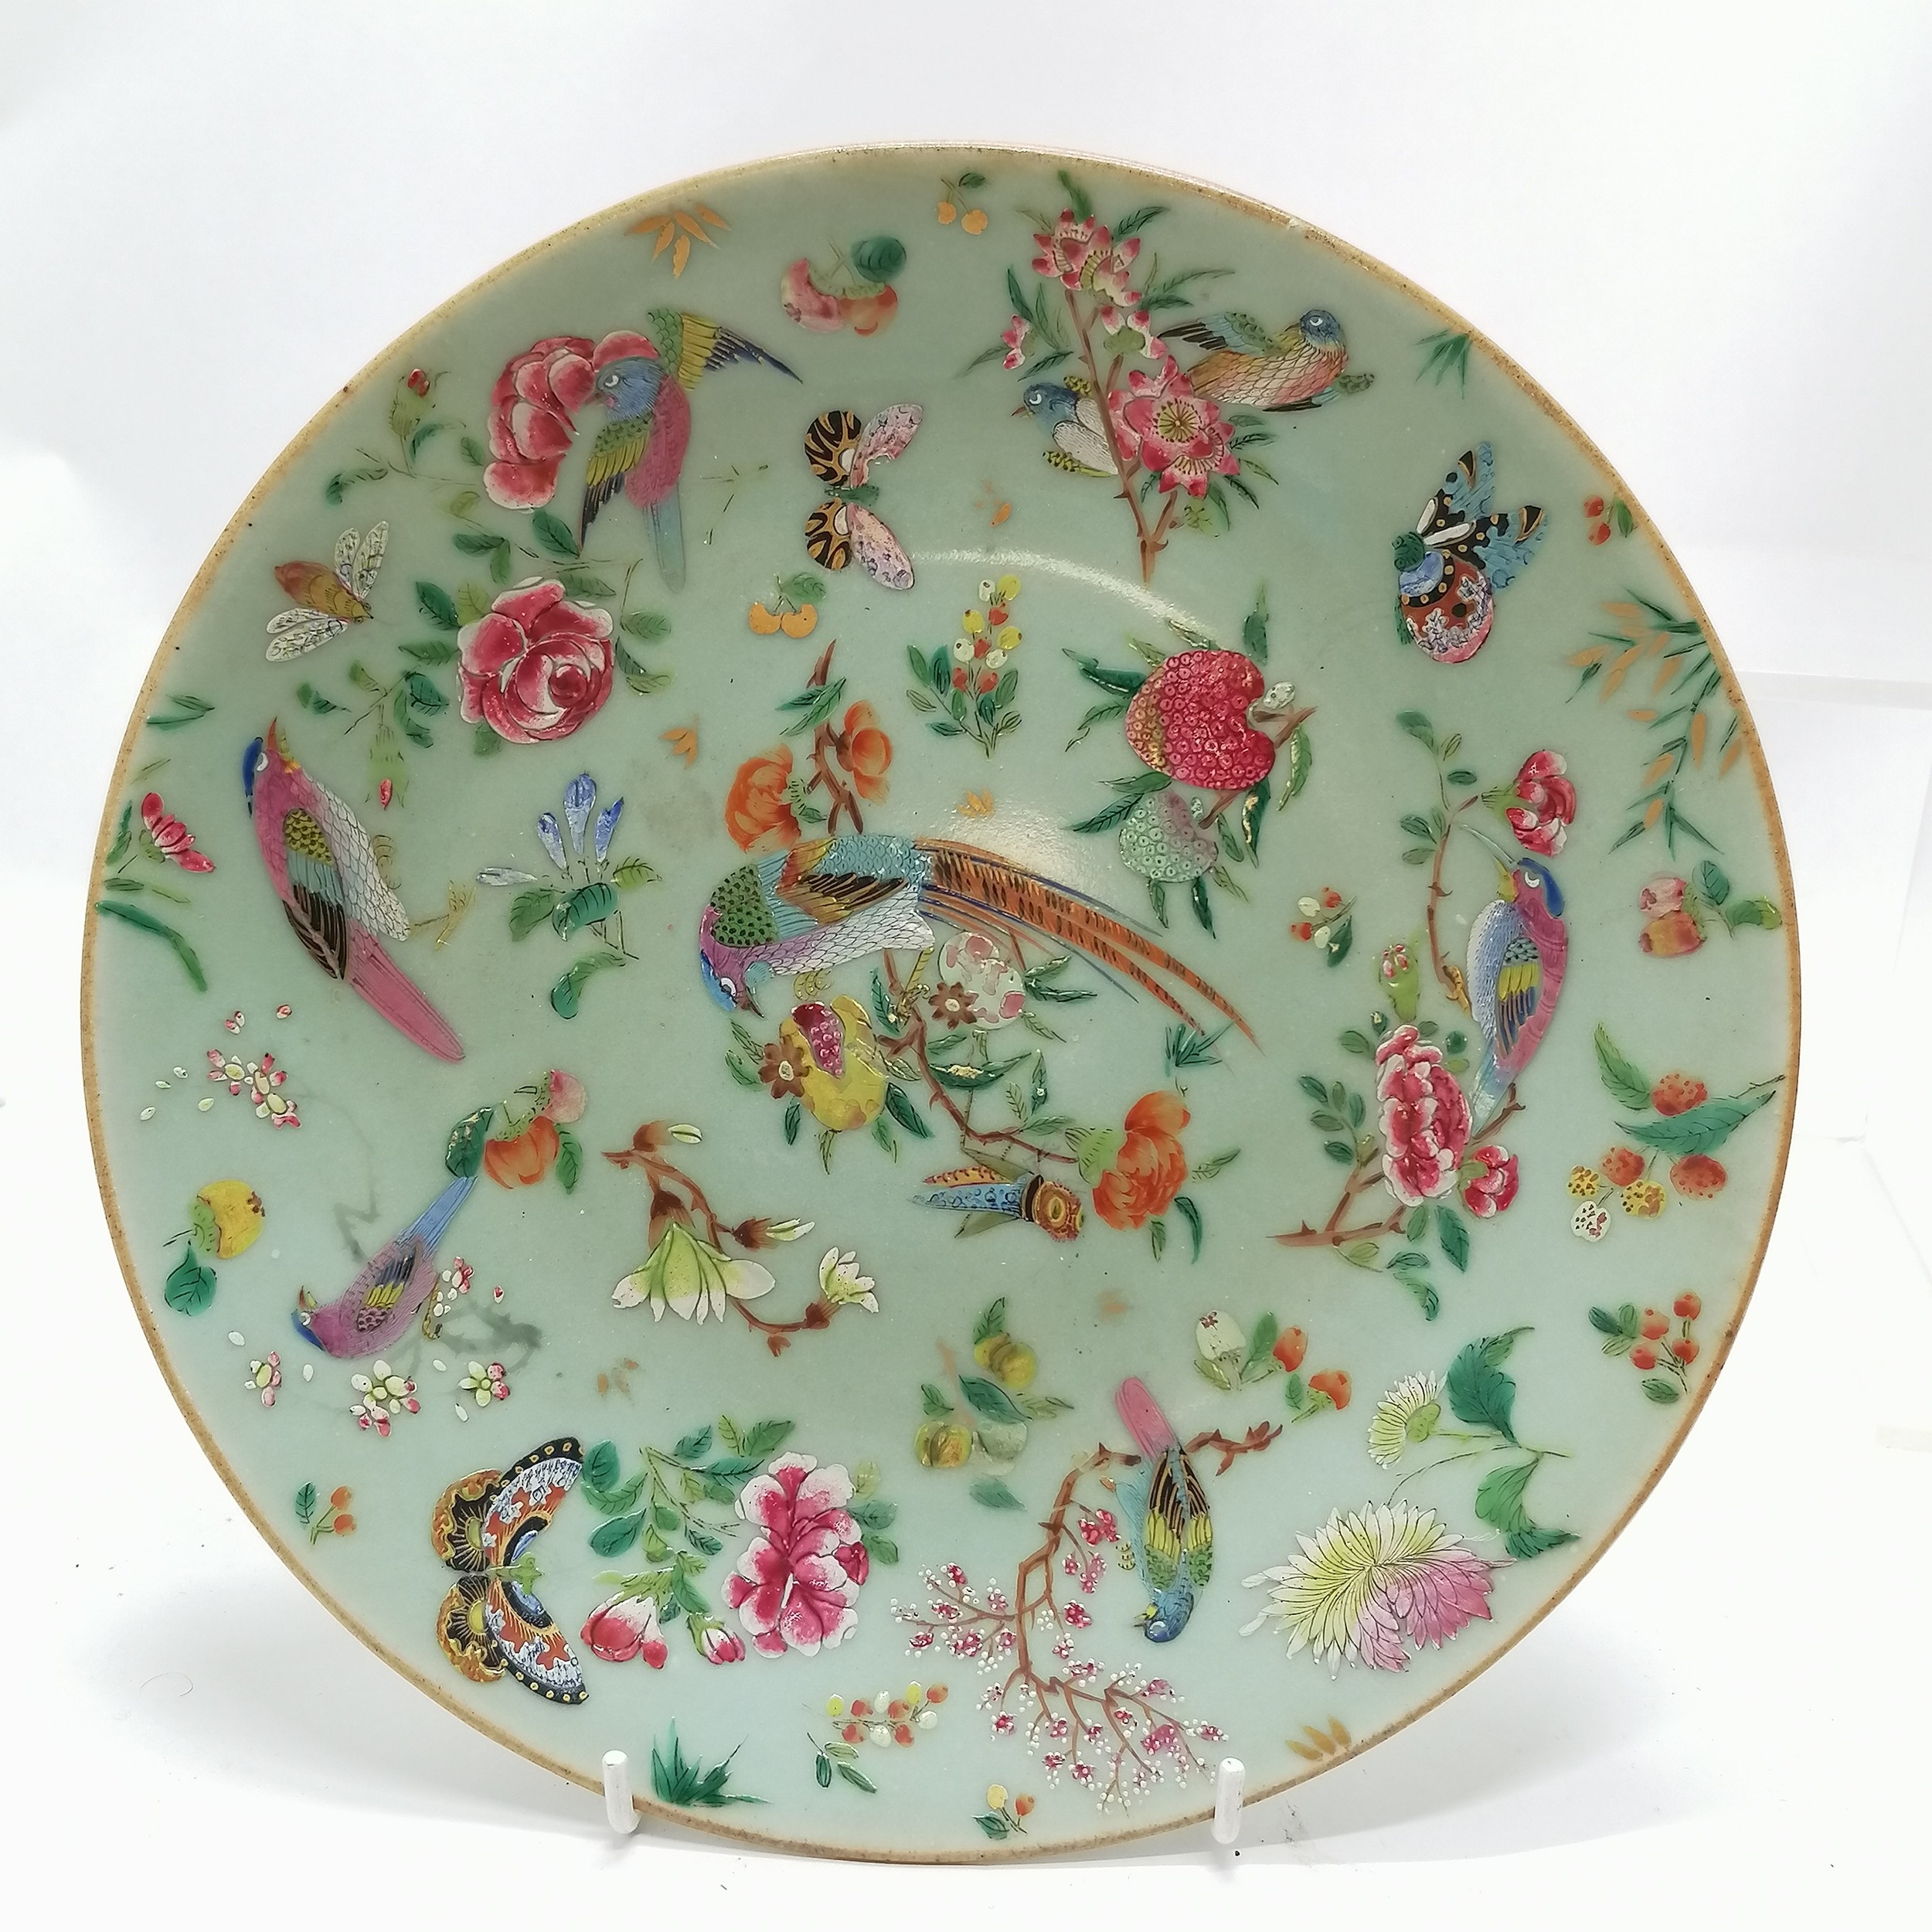 Pair of antique Chinese Cantonese plates with profuse bird & flower decoration - 25.5cm diameter & - Image 2 of 7